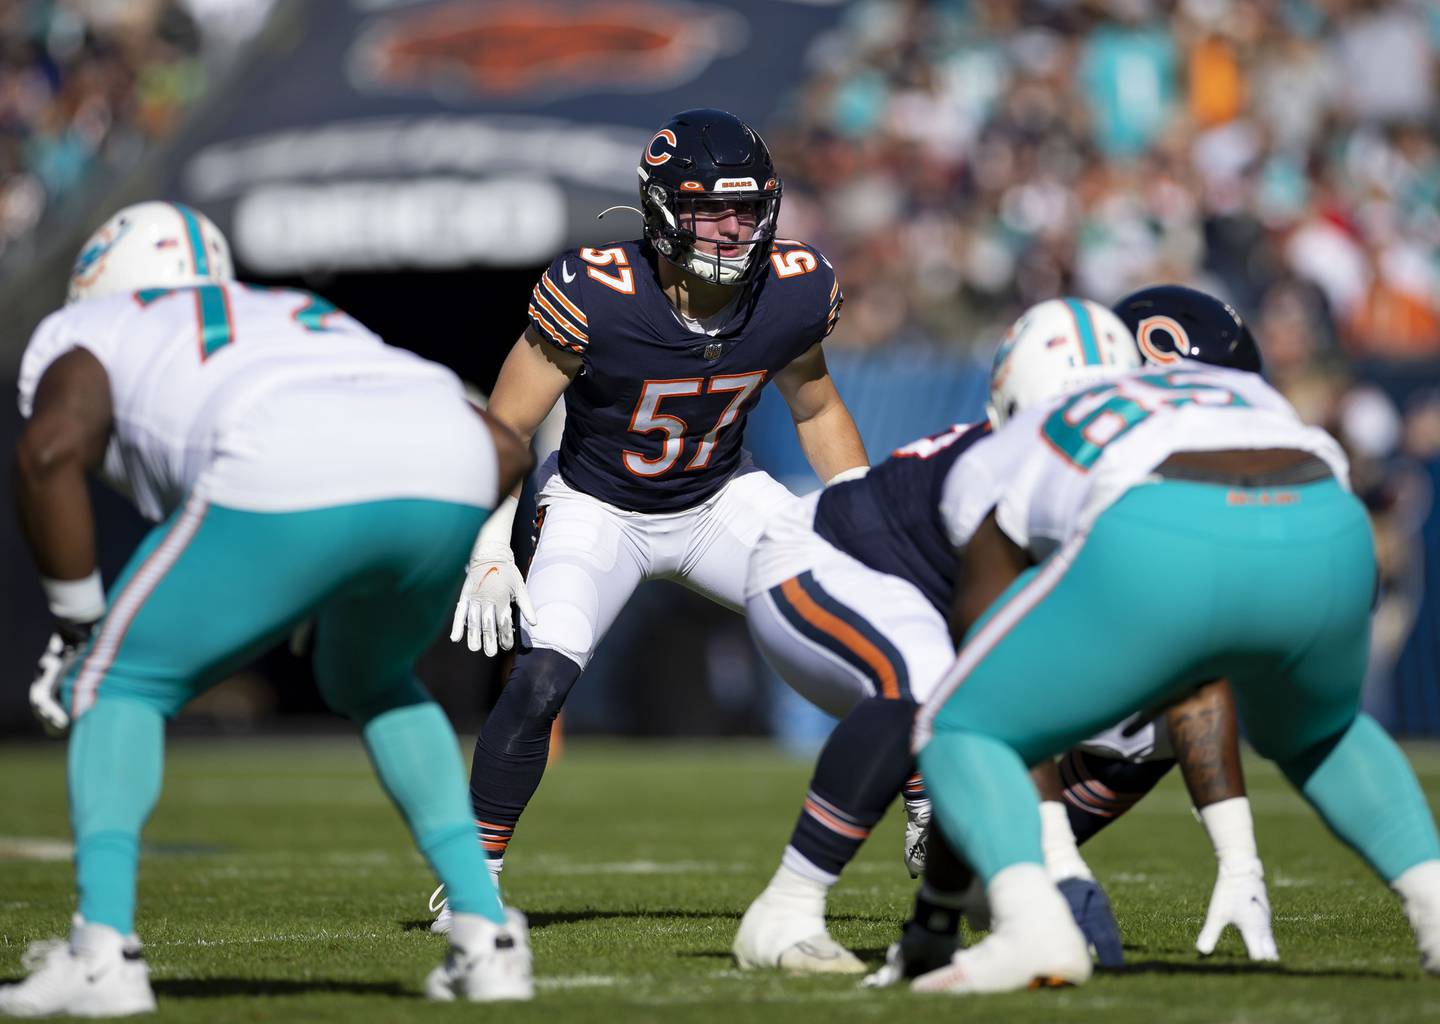 Bears linebacker Jack Sanborn (57) lines up against the Dolphins on Nov. 6, 2022, at Soldier Field.